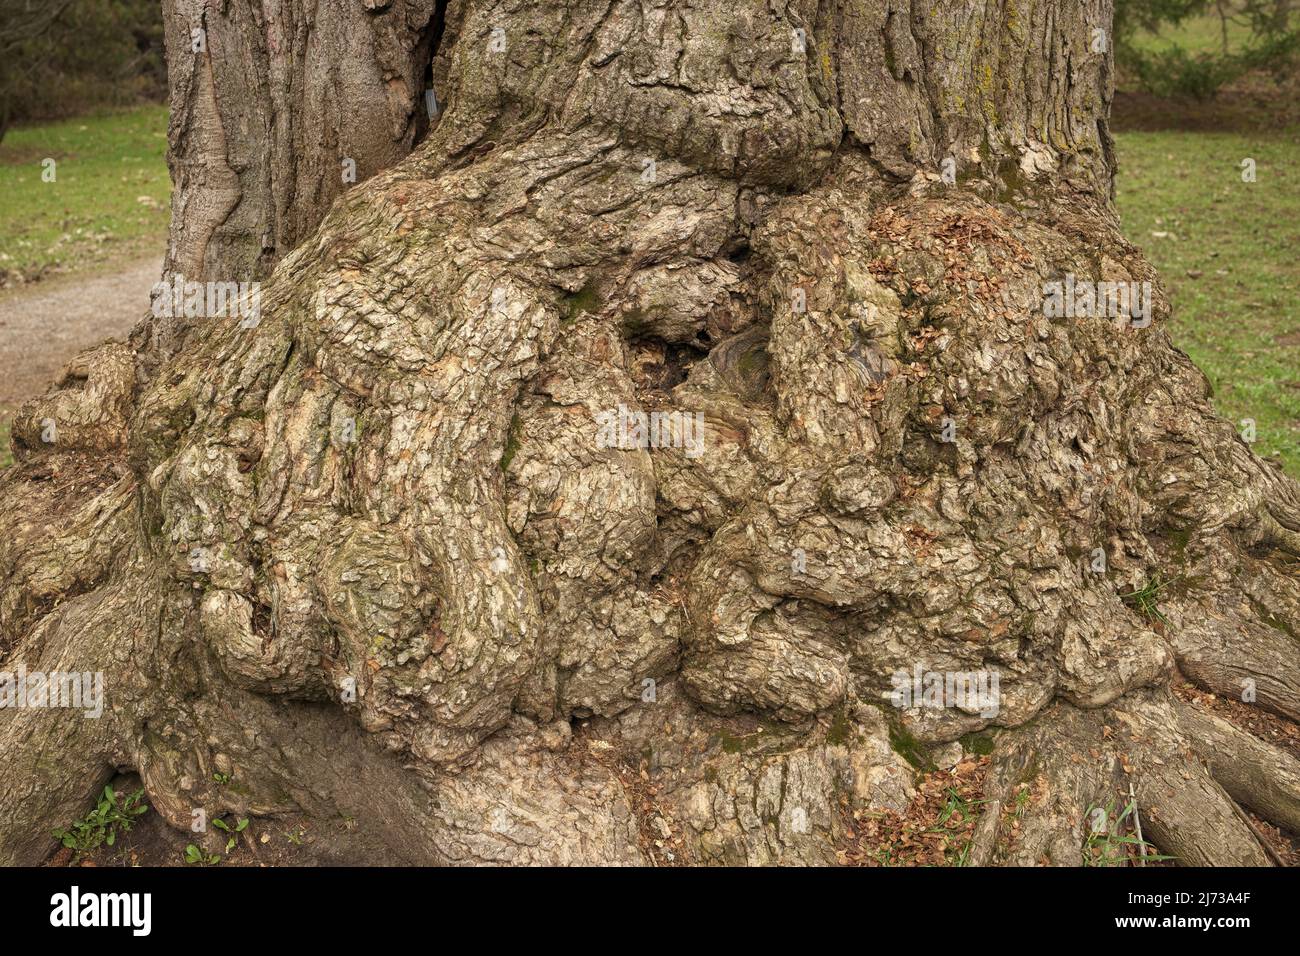 A giant tree burl caused by a parasitoid bacteria. A cancer looking outgrowth Stock Photo